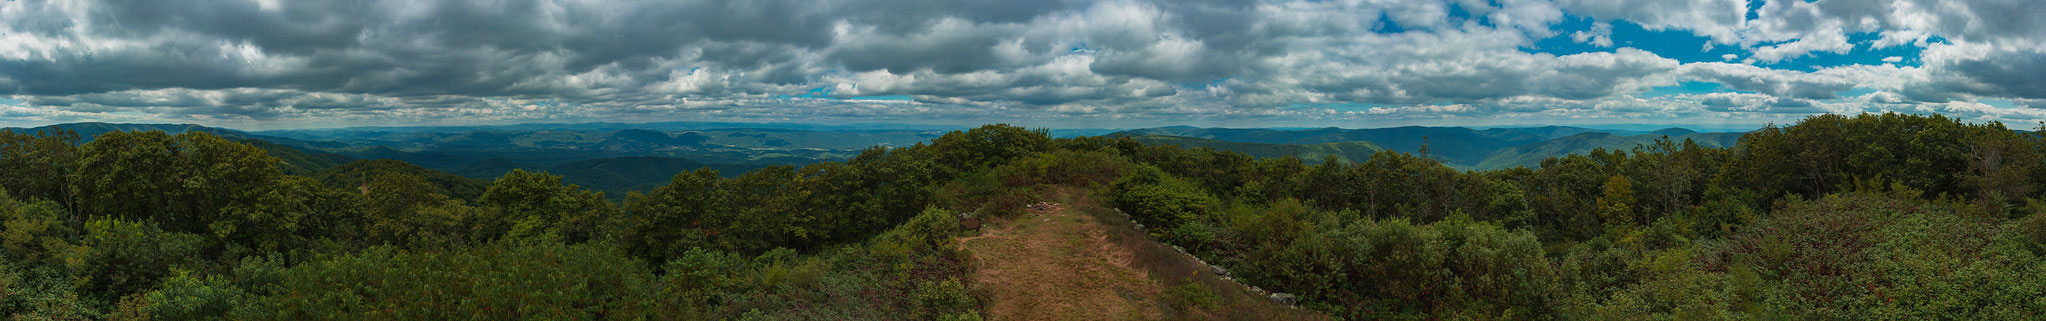 Panorama photograph taken from the top of High Knob, Virginia, showing forested hills and valleys in the distance